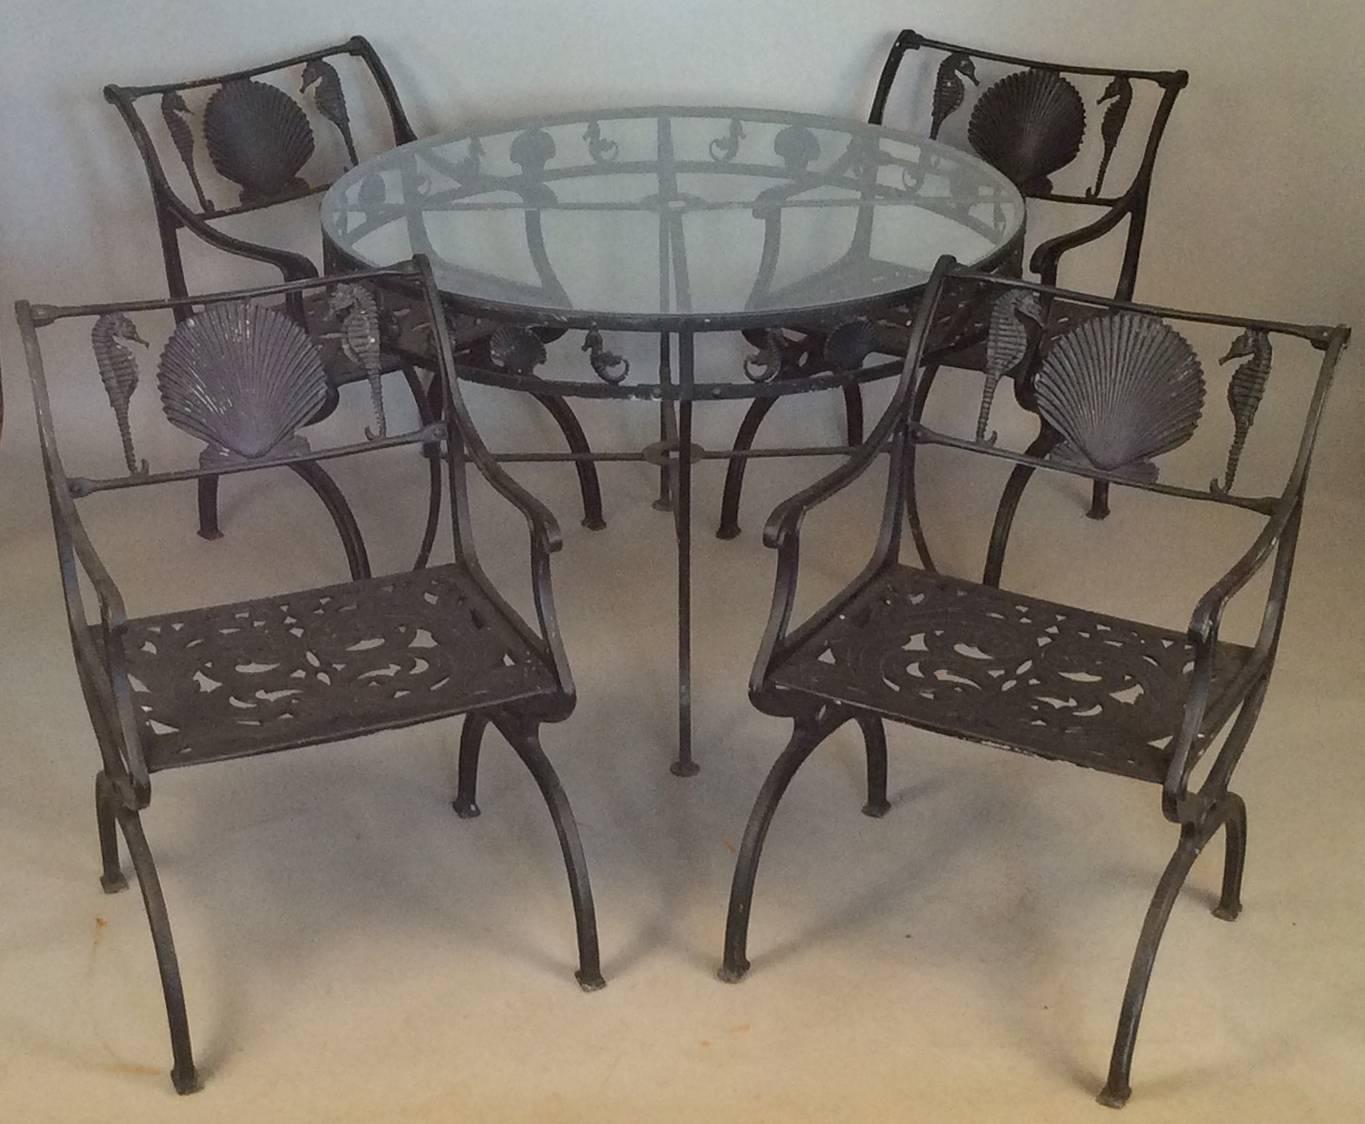 A wonderful vintage 1950s outdoor dining set designed by Molla and made in heavy cast aluminum, with their iconic seashell and seahorse motif. 

The famous Preakers hotel in Palm Beach was just one of several hey-day hotels around the country